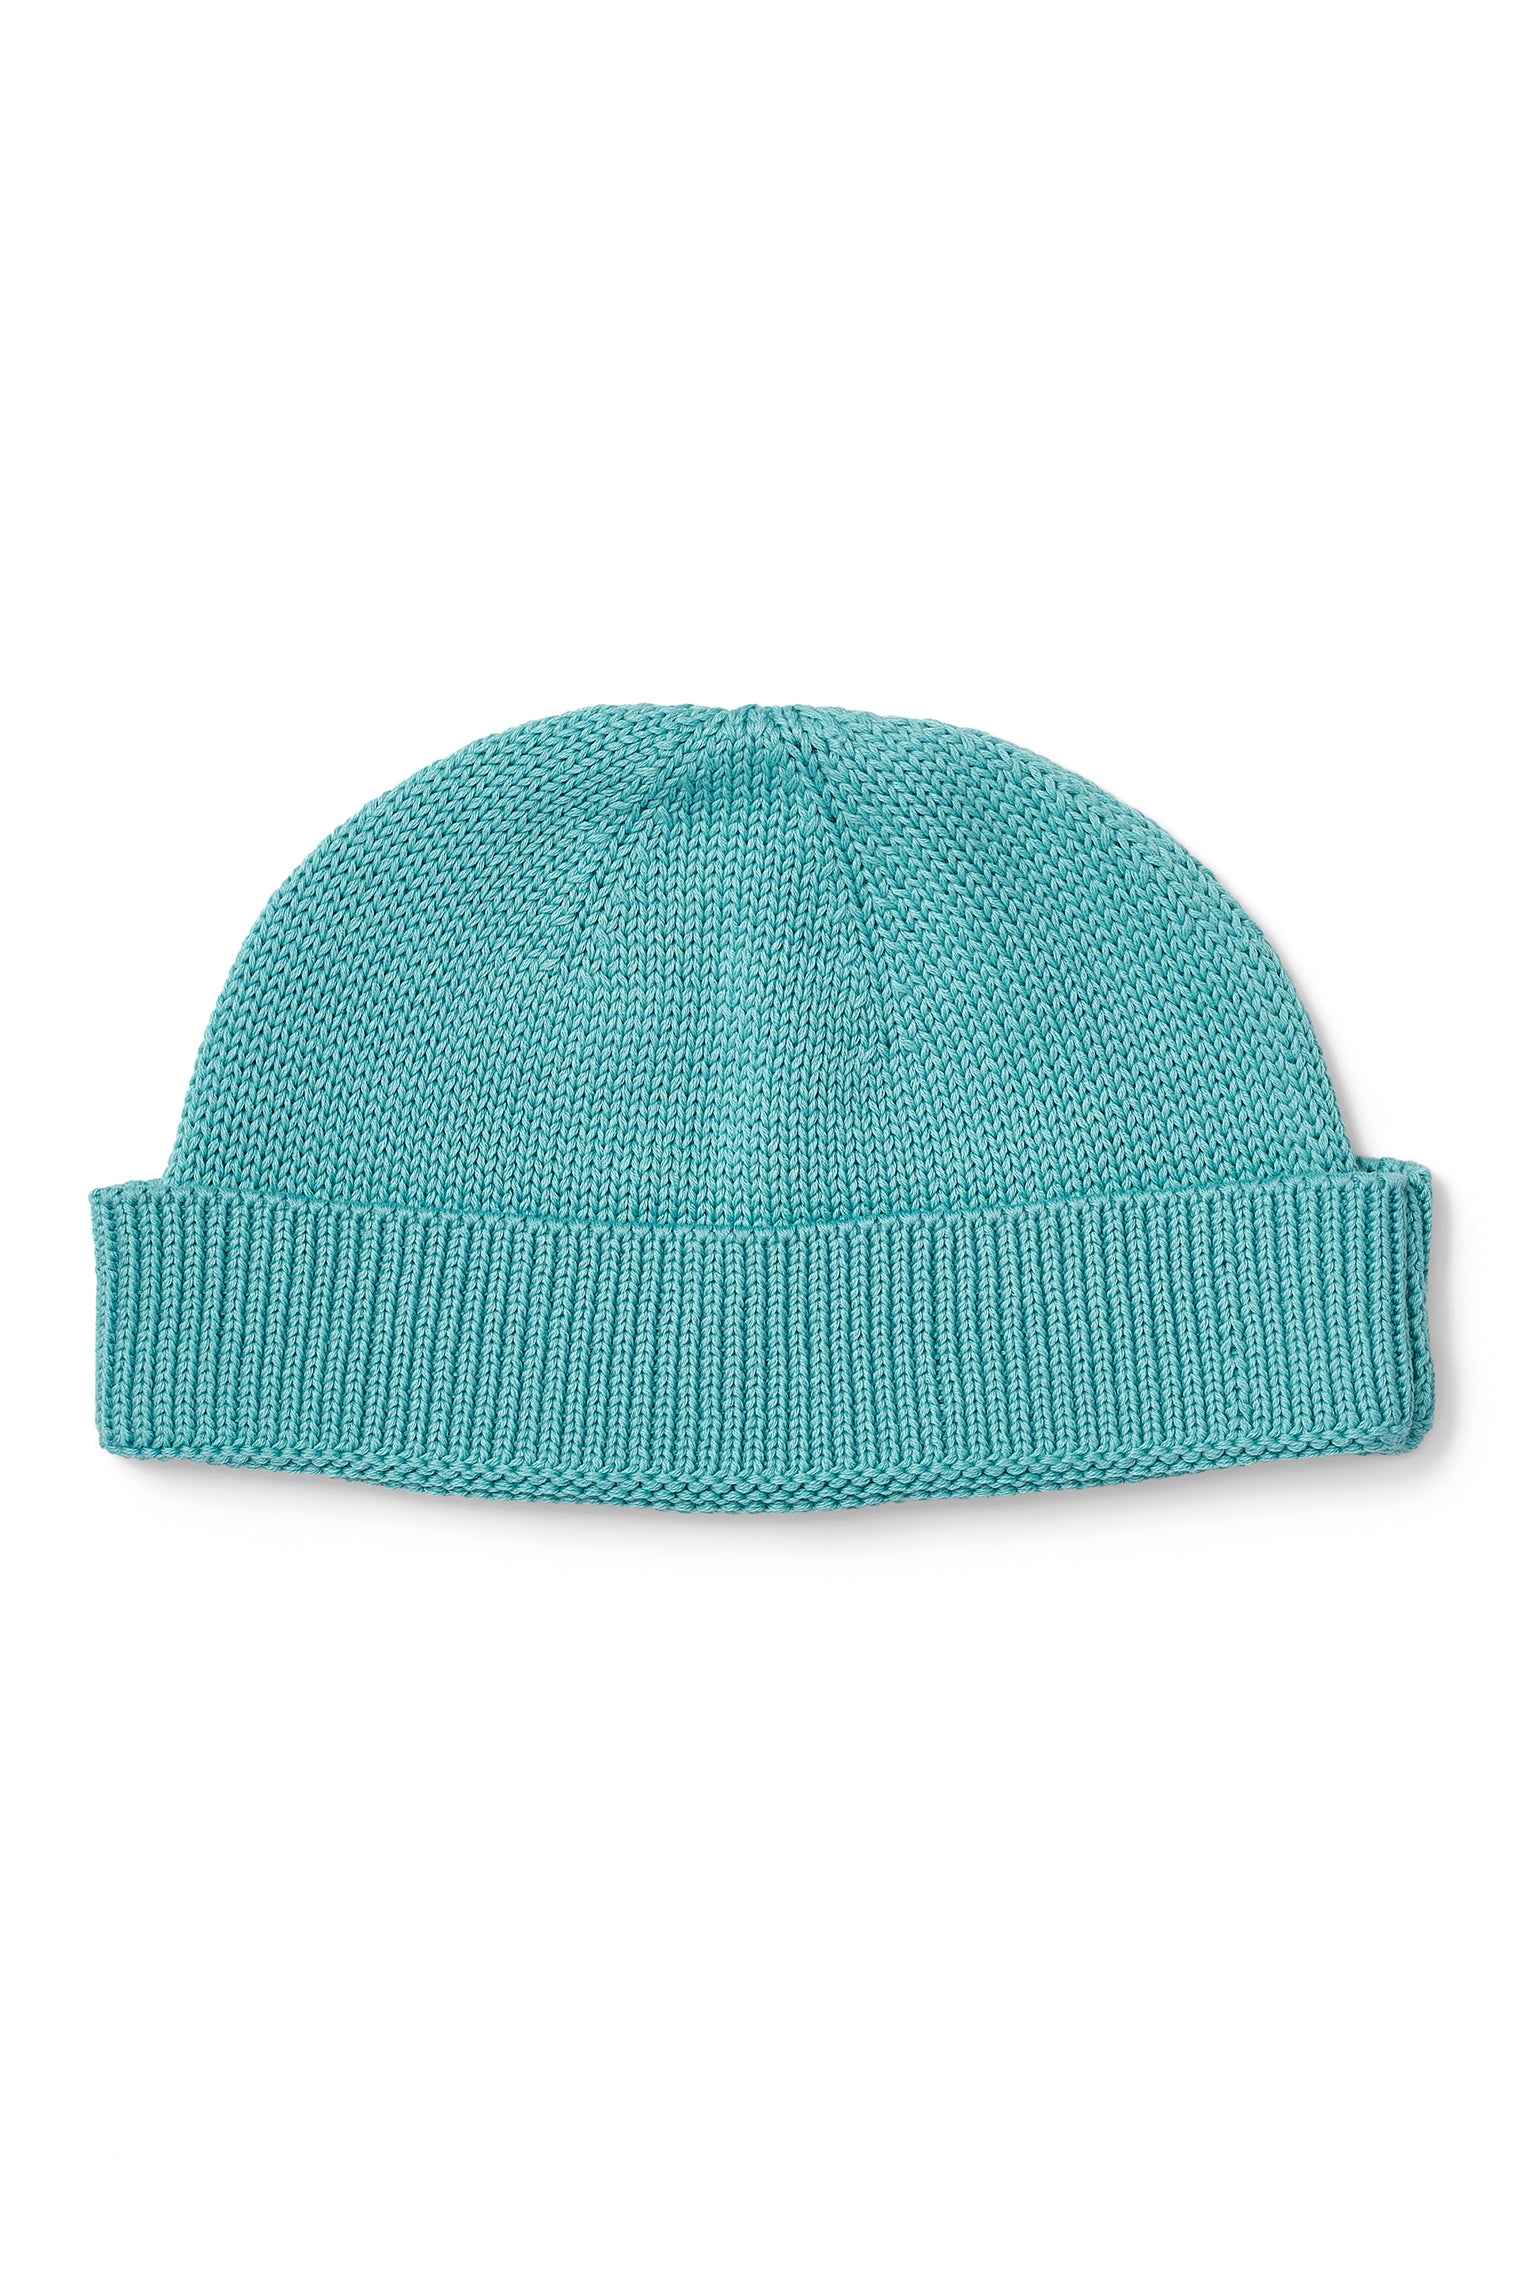 Woody Mini Fisherman Turquoise Beanie - Hats for Tall People - Lock & Co. Hatters London UK